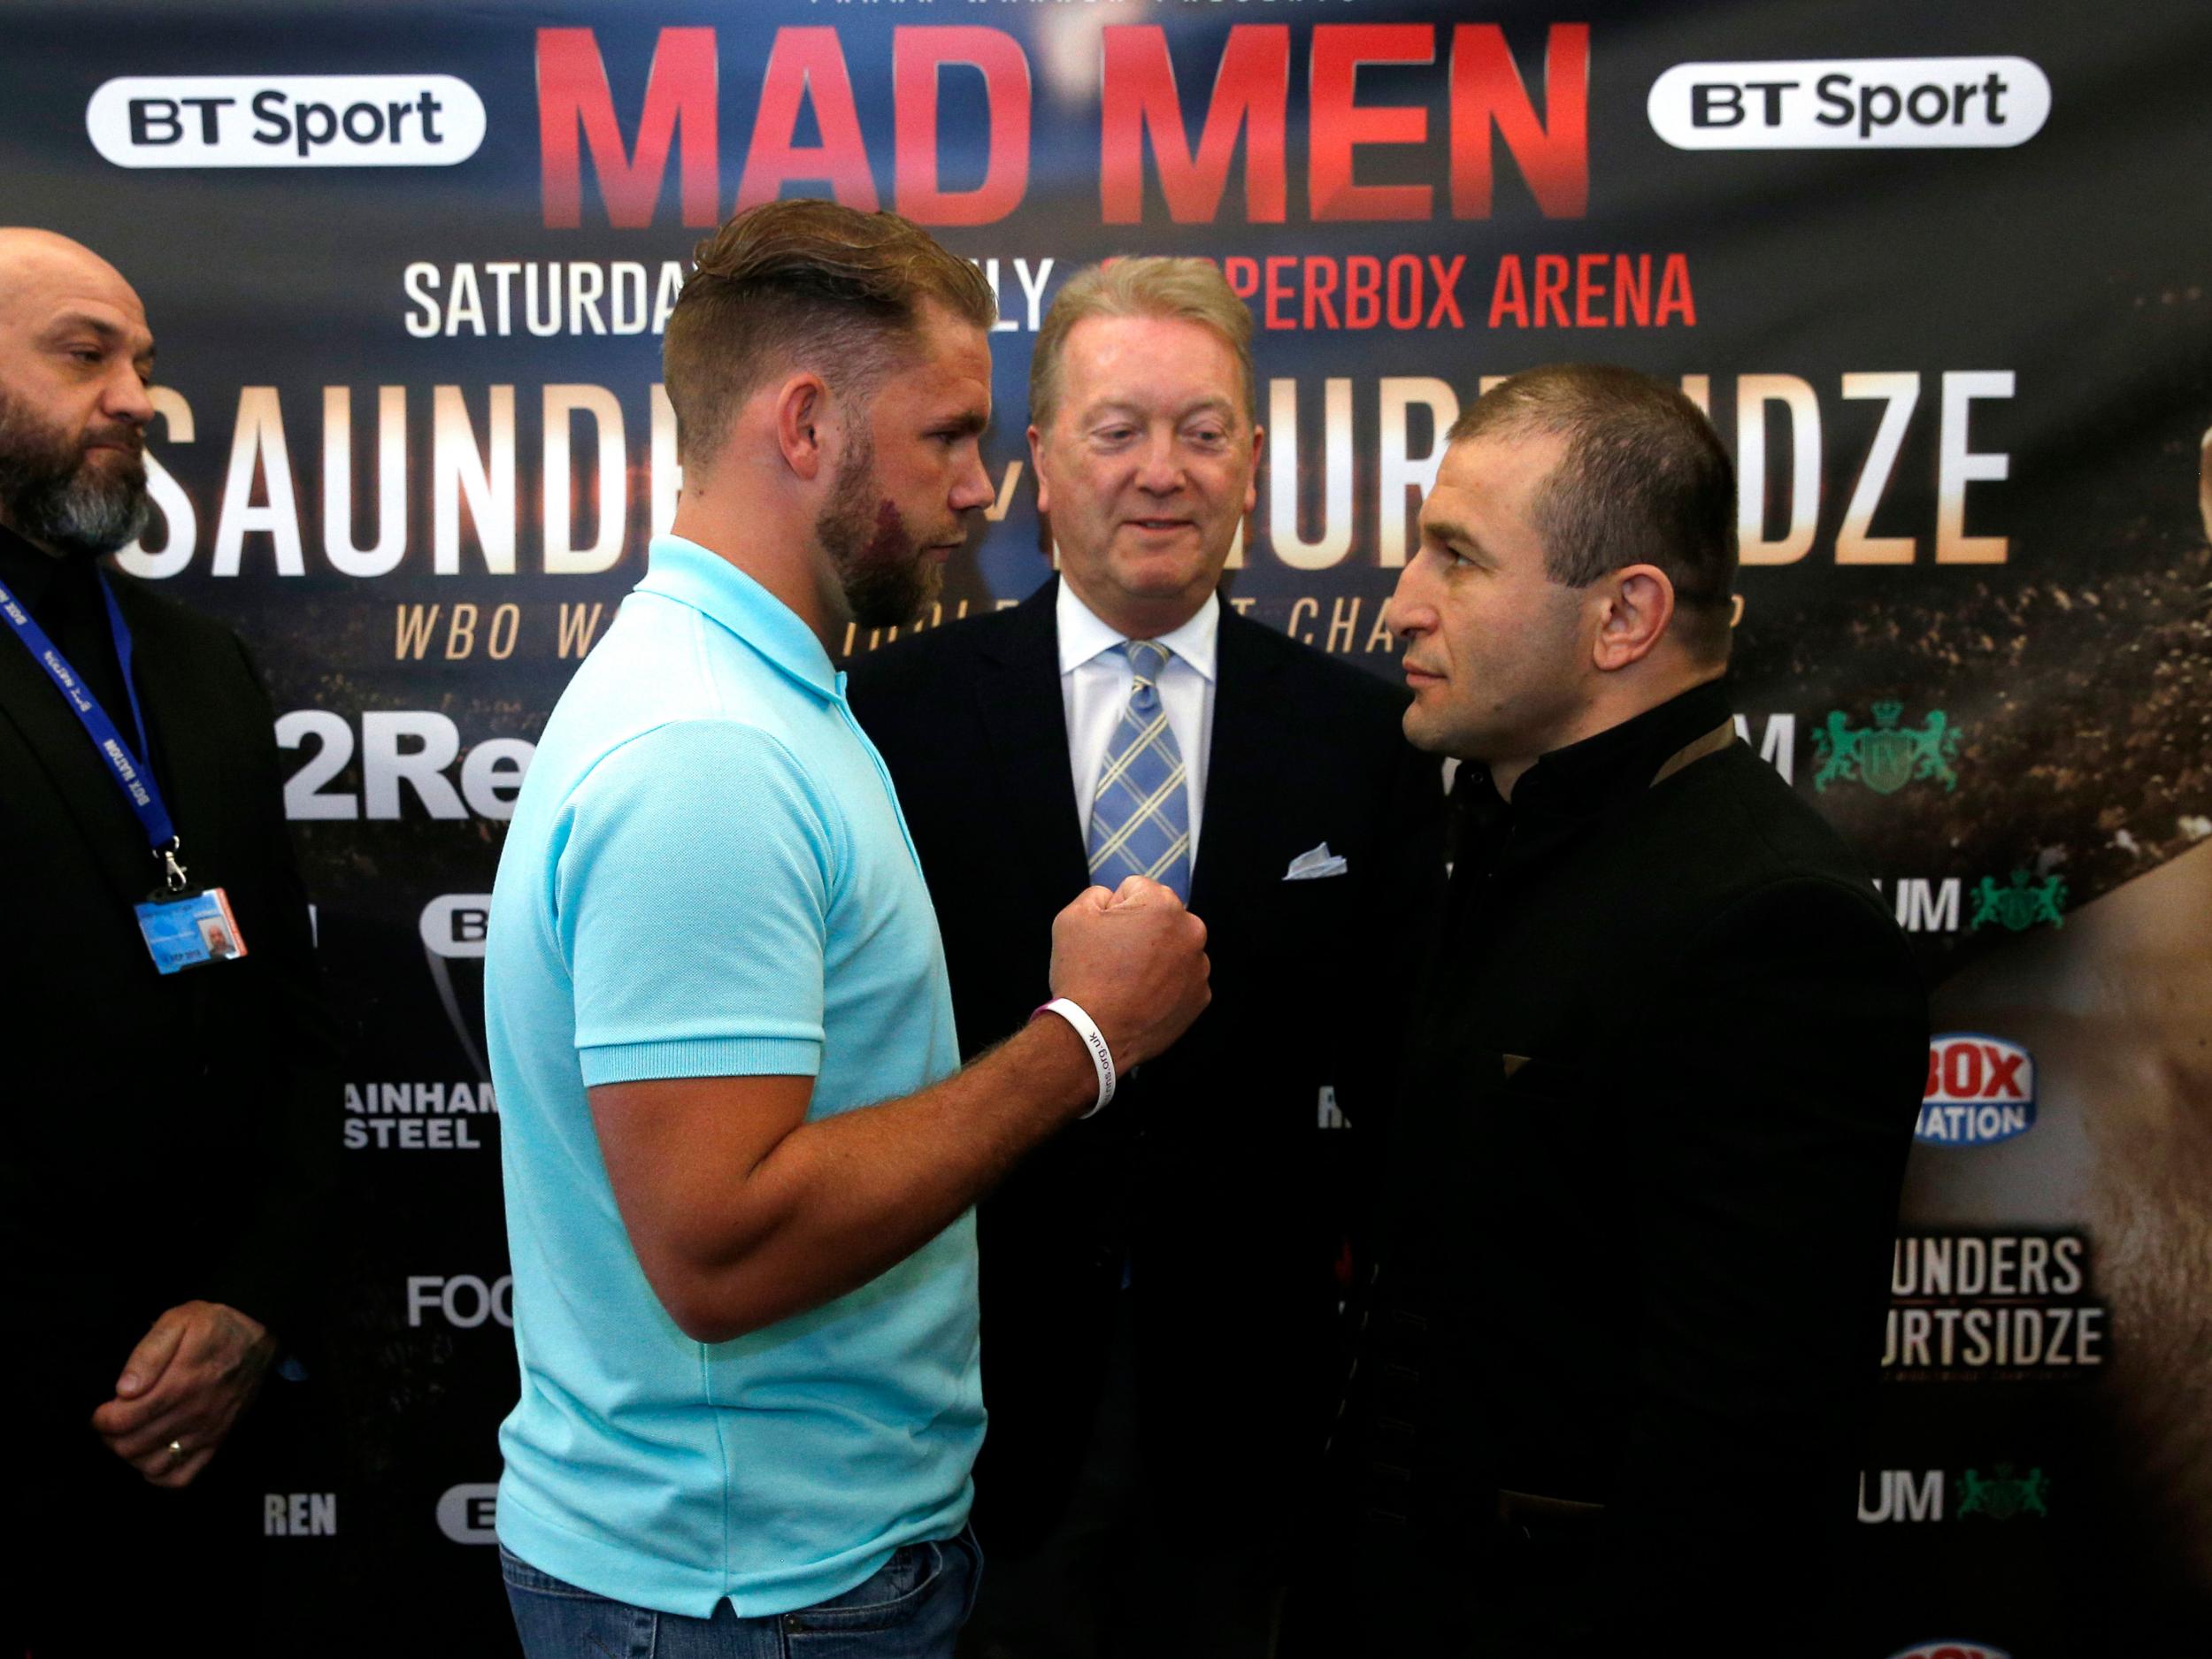 Avtandil Khurtsidze (right) faces British boxer Billy Joe Saunders at a press conference to promote their planned fight. Before it could take place, Khurtsidze was arrested. (Reuters / Andrew Couldridge )